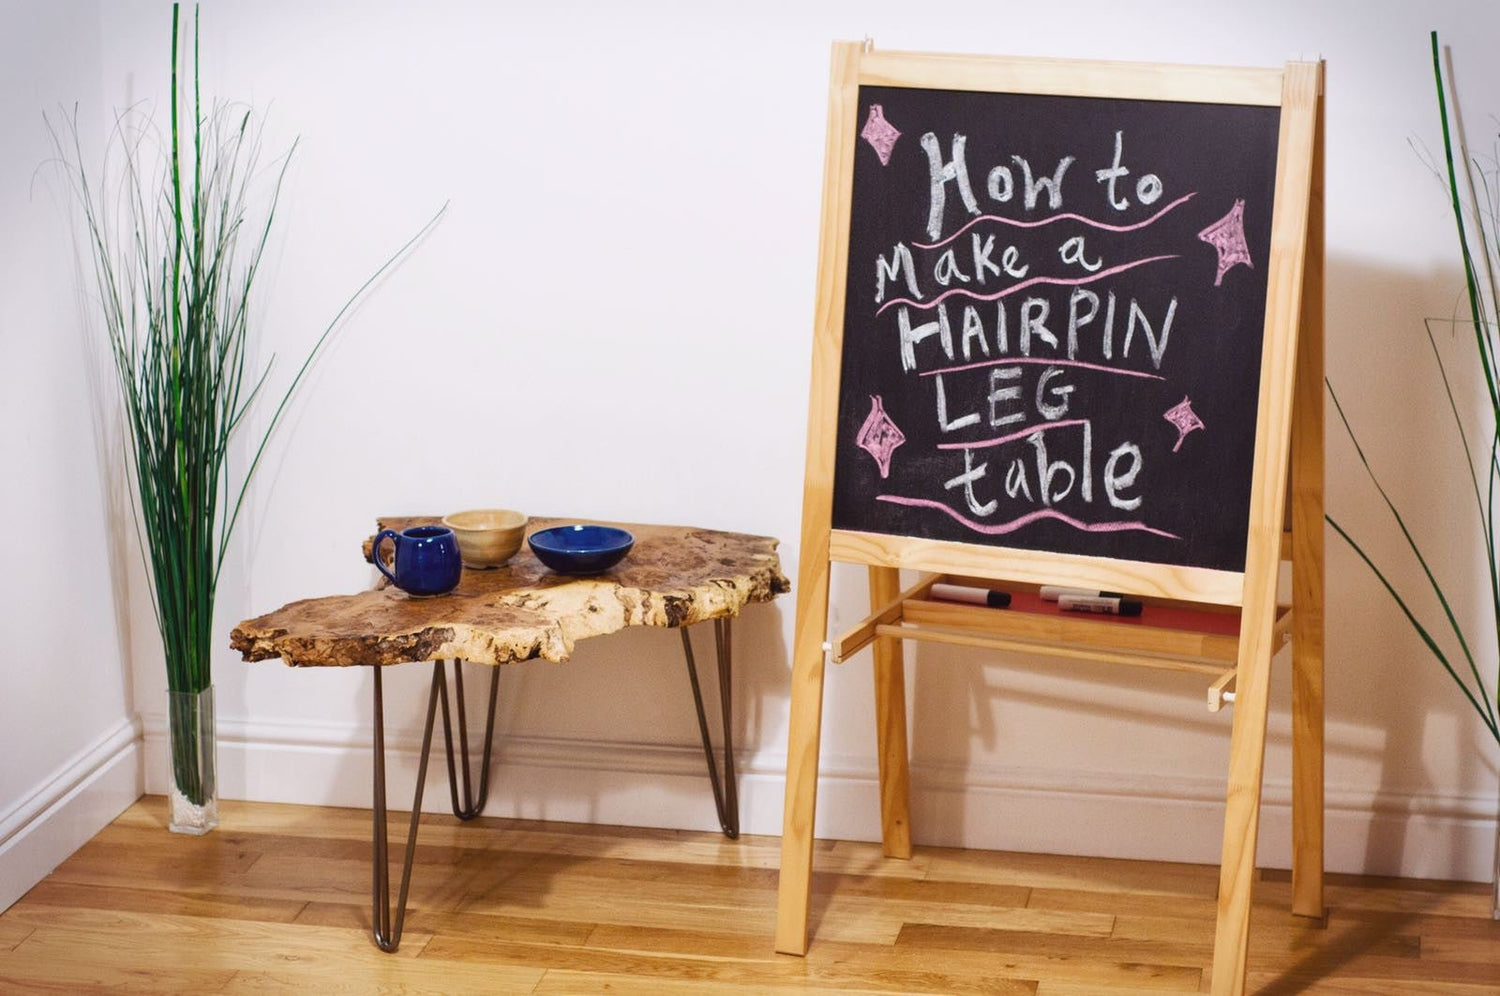 How to make your own hairpin leg table - The Hairpin Leg Co.